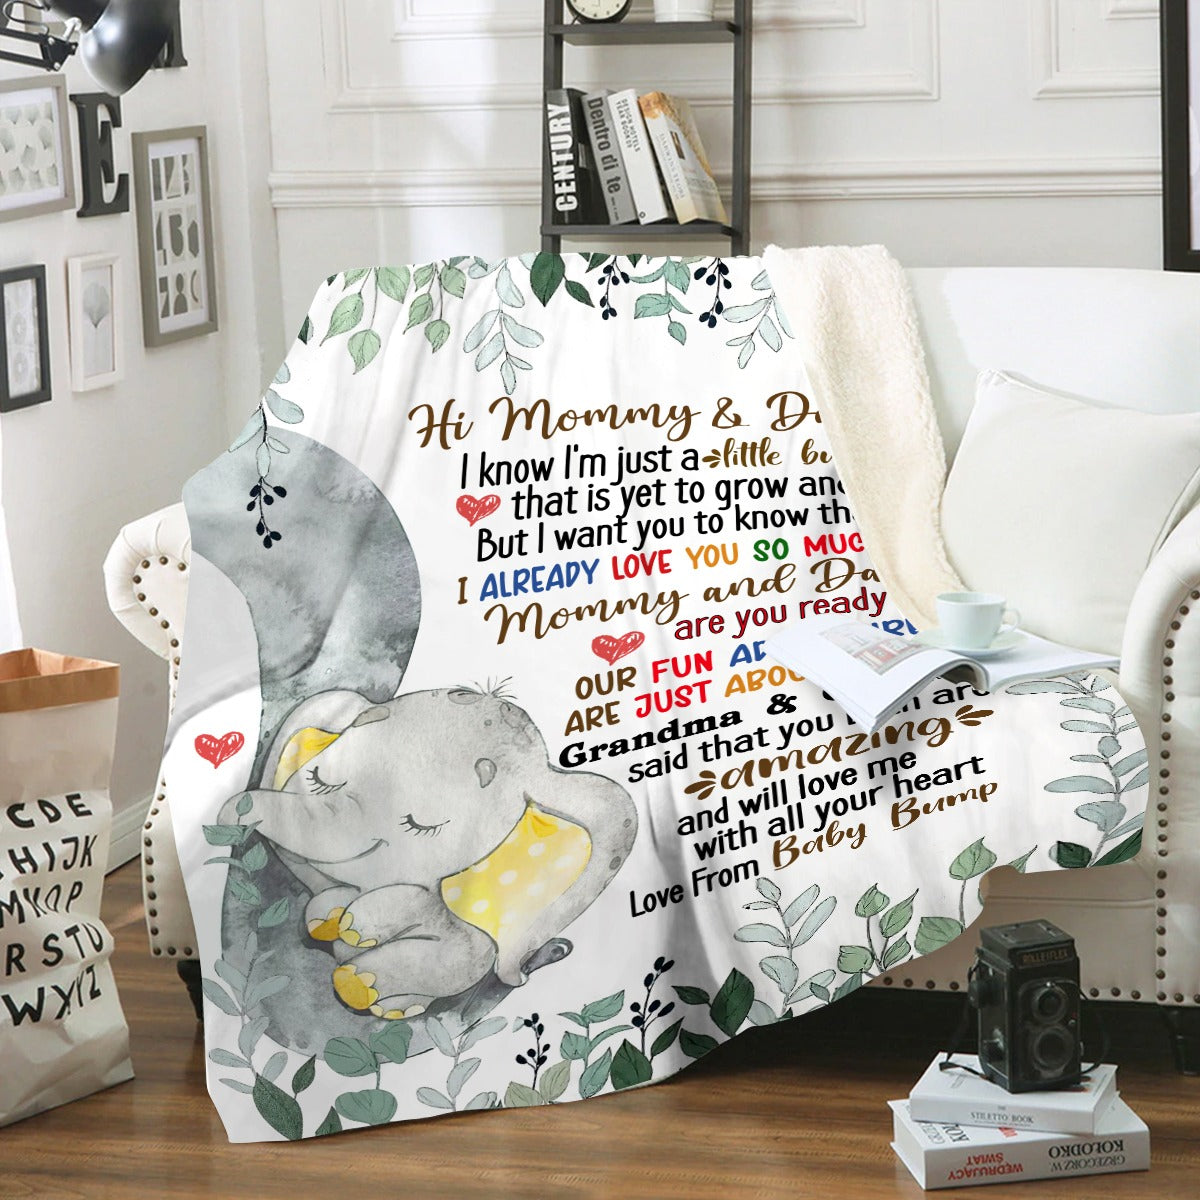 50% OFF SALE - HI MOMMY & DADDY  - I'M JUST A LITTLE BUMP - LOVE FROM BABY BUMP - COZY FLEECE/PREMIUM SHERPA BLANKET